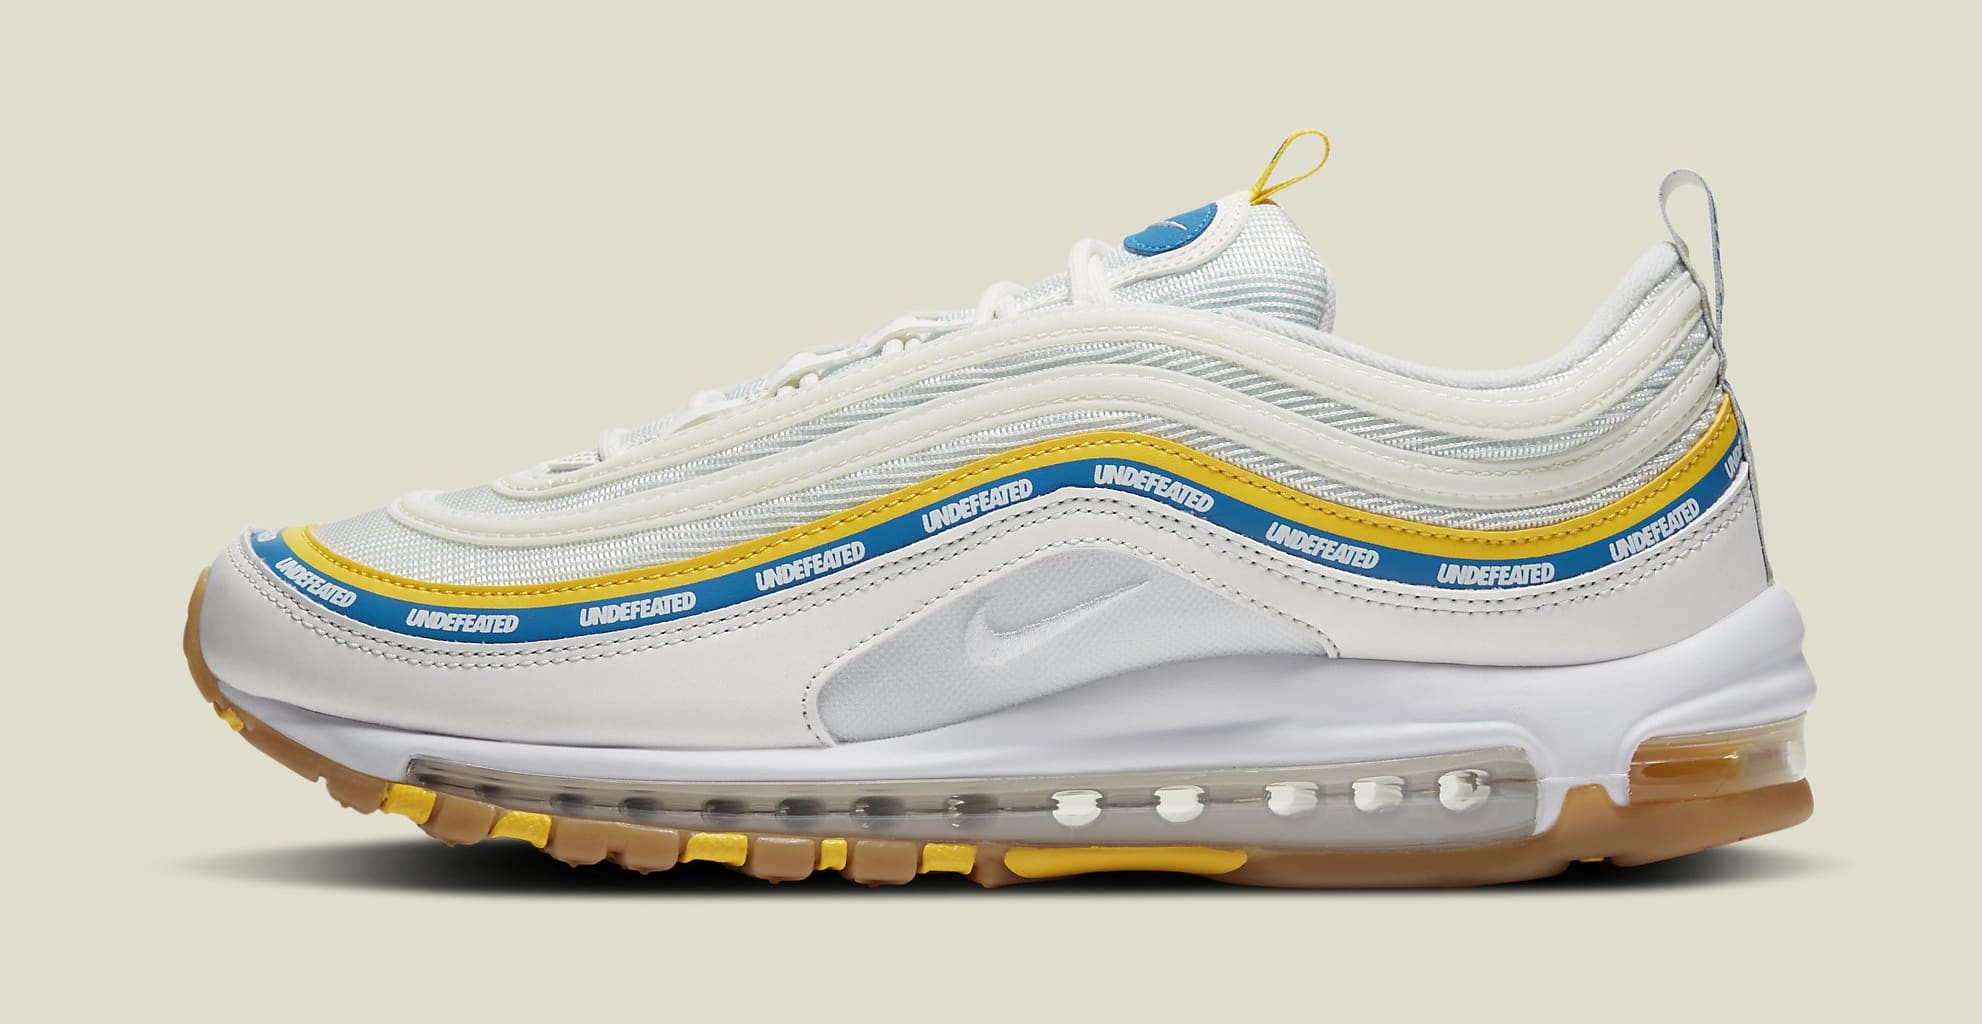 proteína reserva depositar A Third Undefeated x Nike Air Max 97 Surfaces | Complex